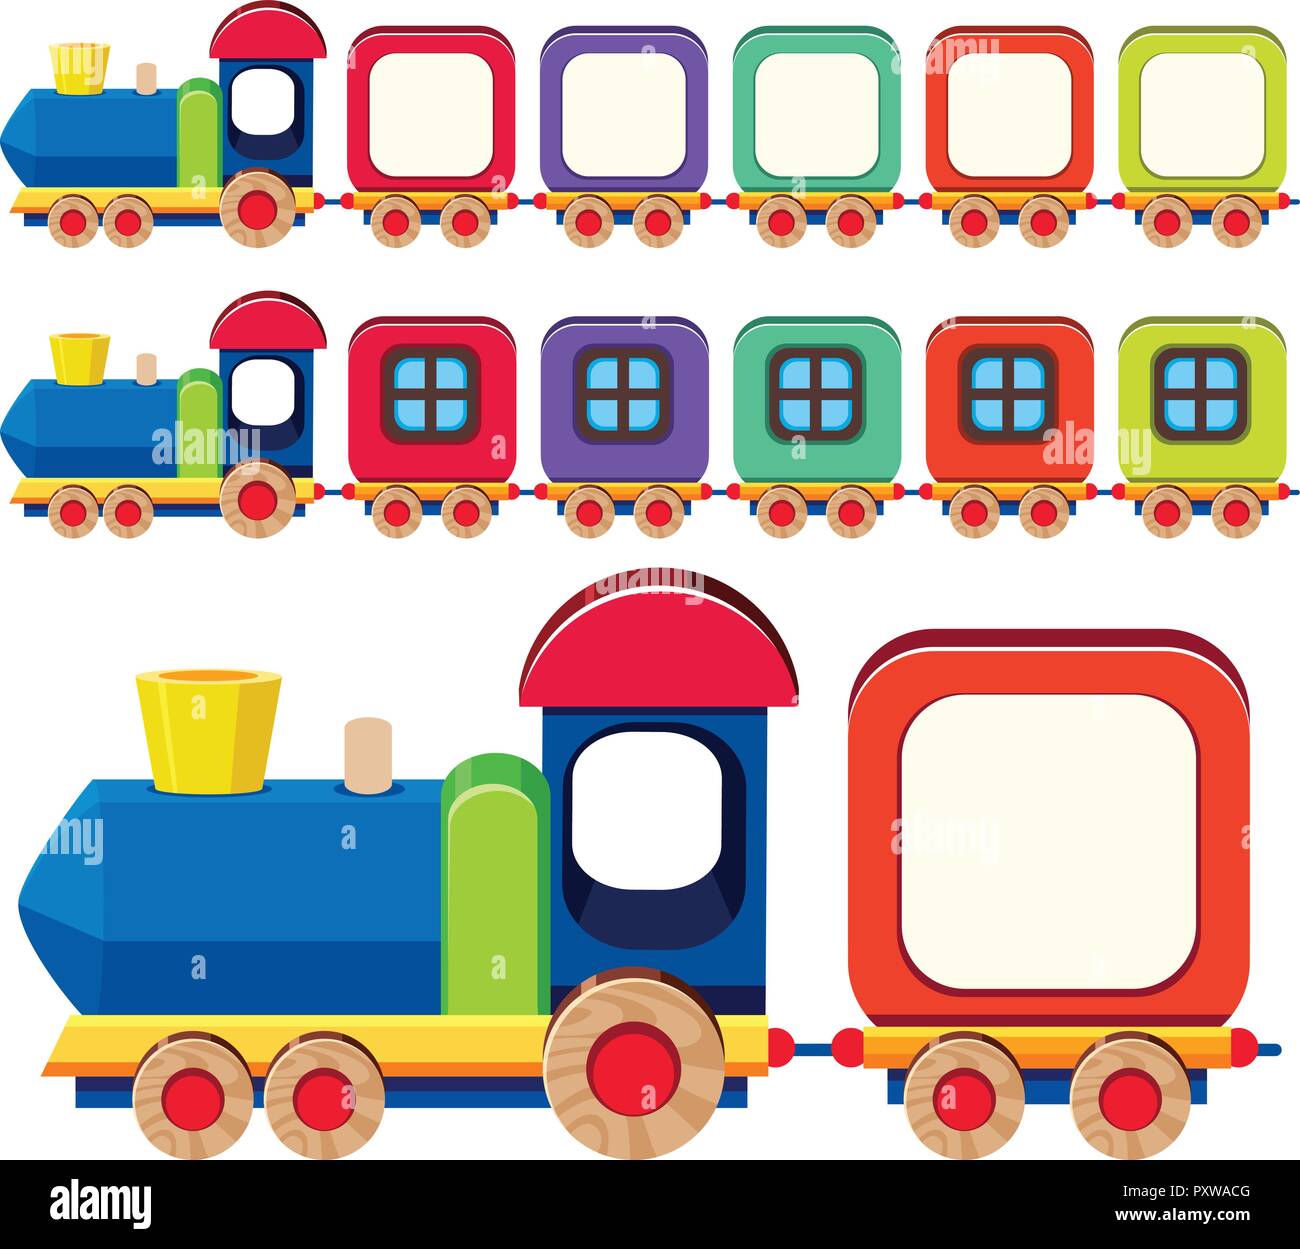 Wooden train in different colors illustration Stock Vector